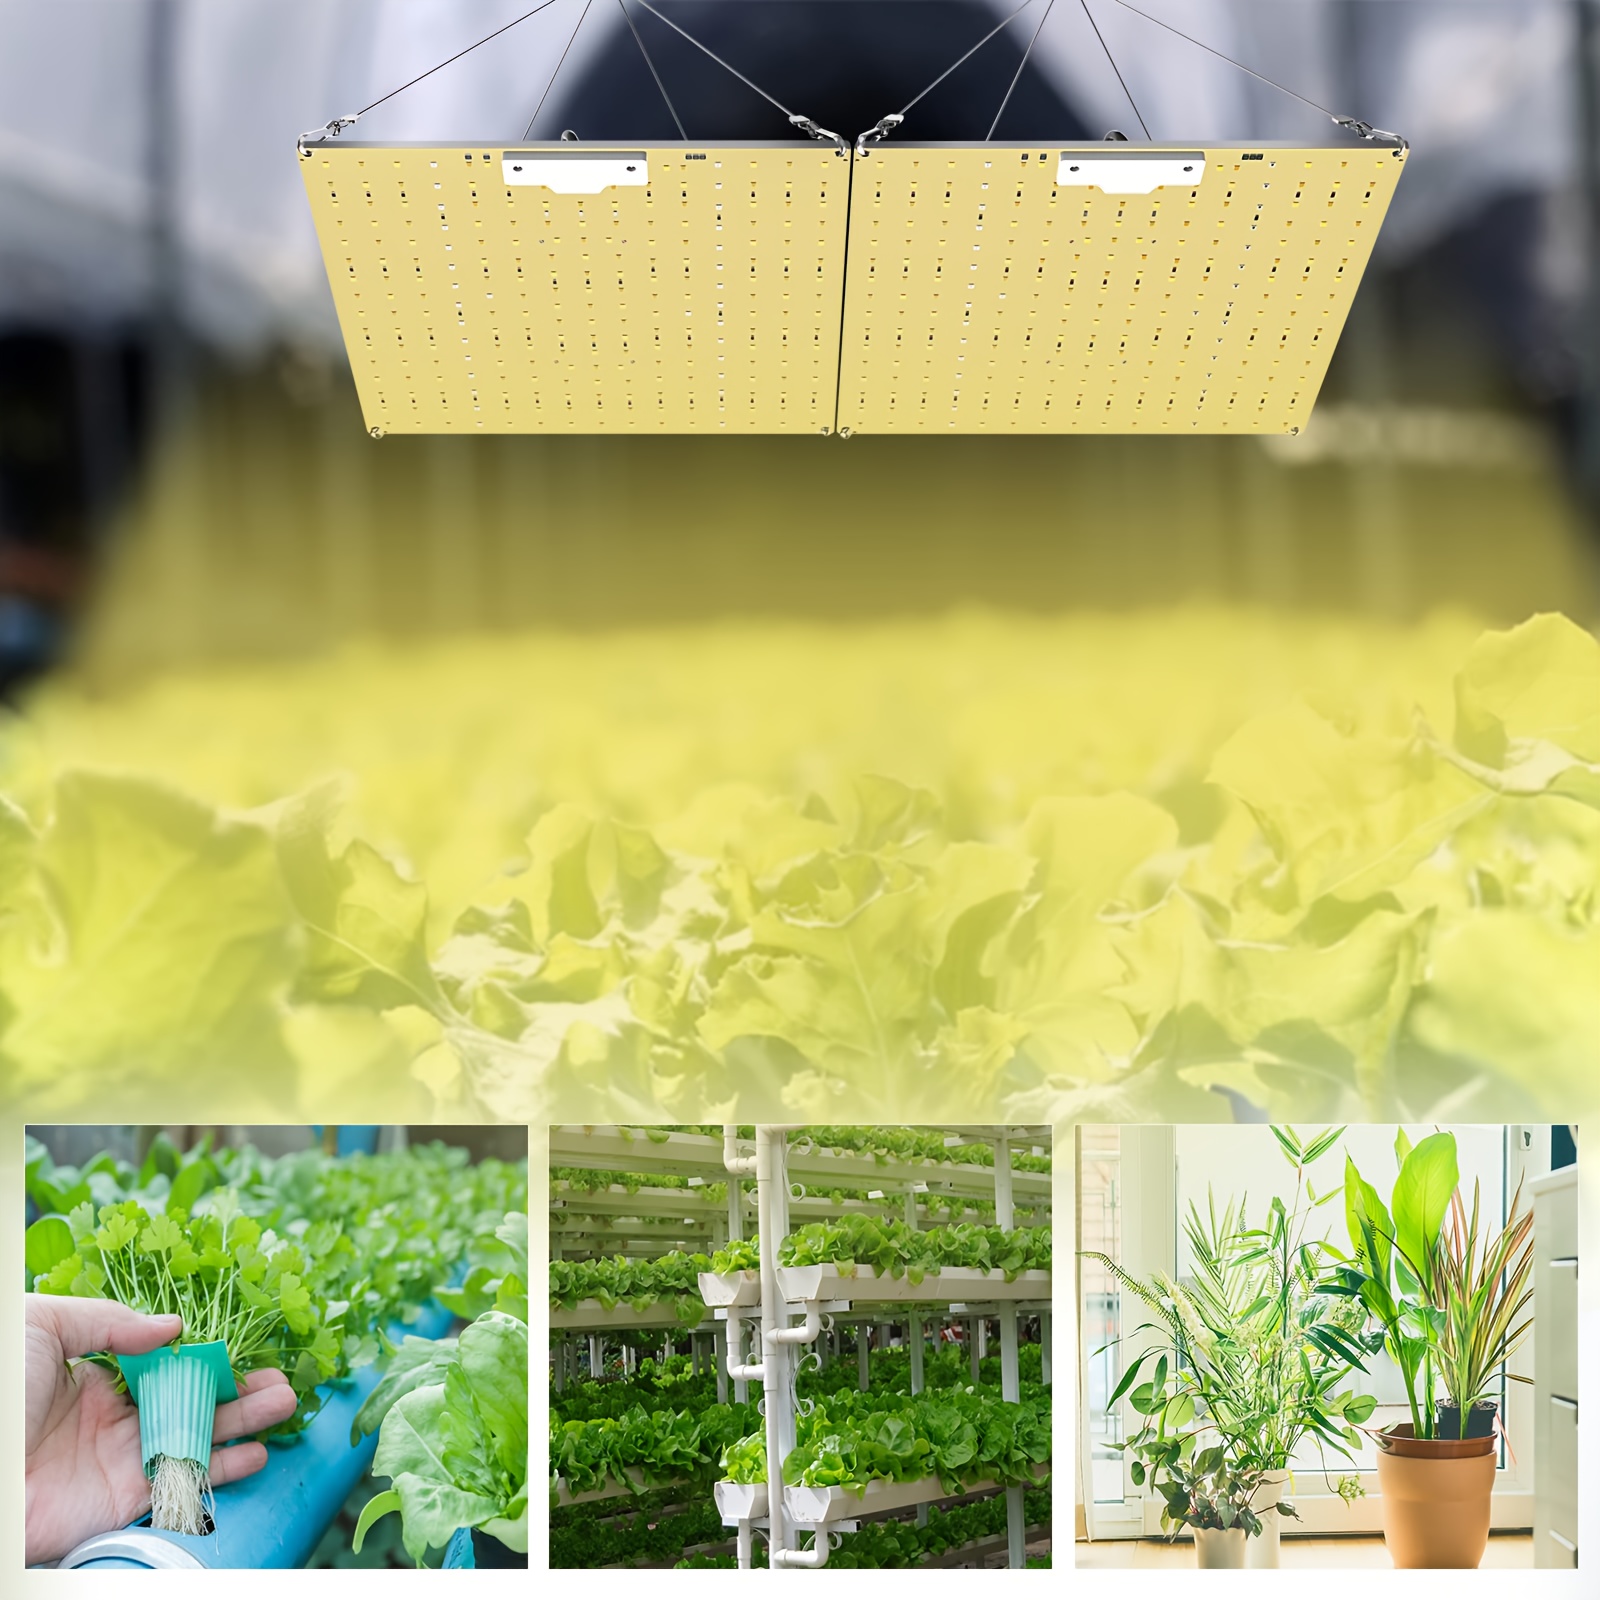 

Full Spectrum Led Quantum Plate Plant Grow Light For Vegetables, Flowers, Greenery Greenhouse Plant Growth Fill Lights